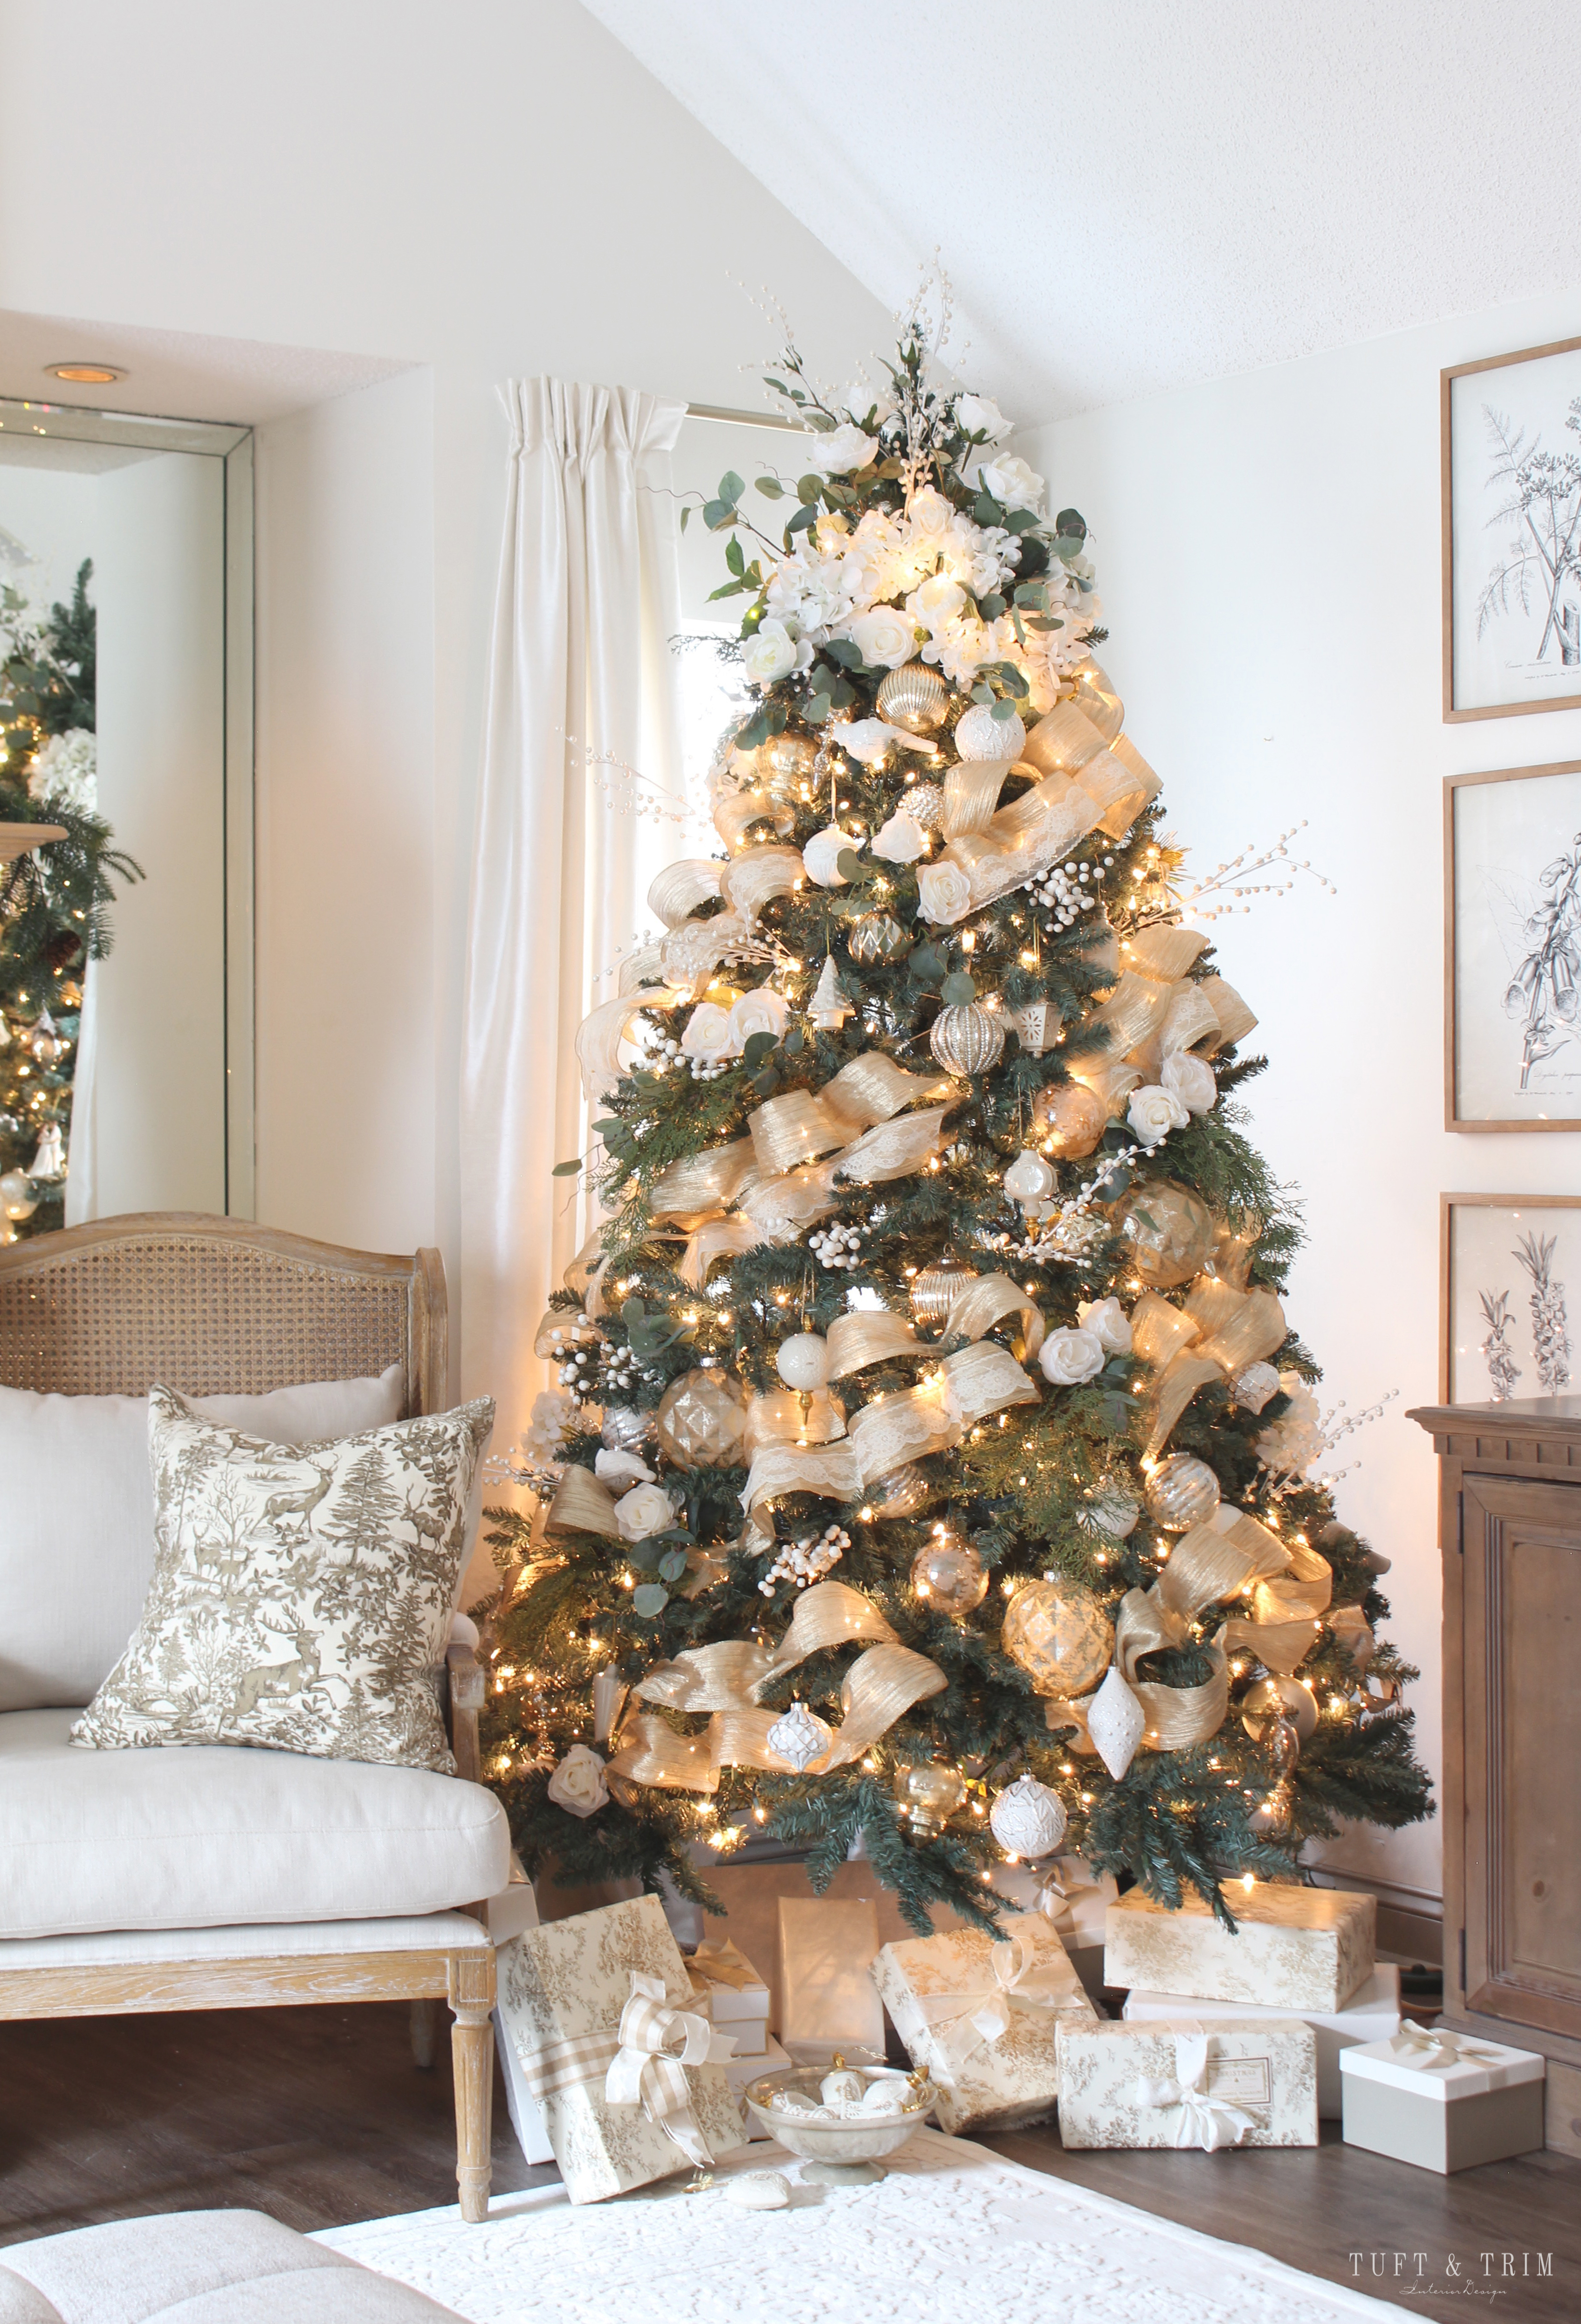 Christmas Decorating Idea: Adding Floral Picks to Your Tree